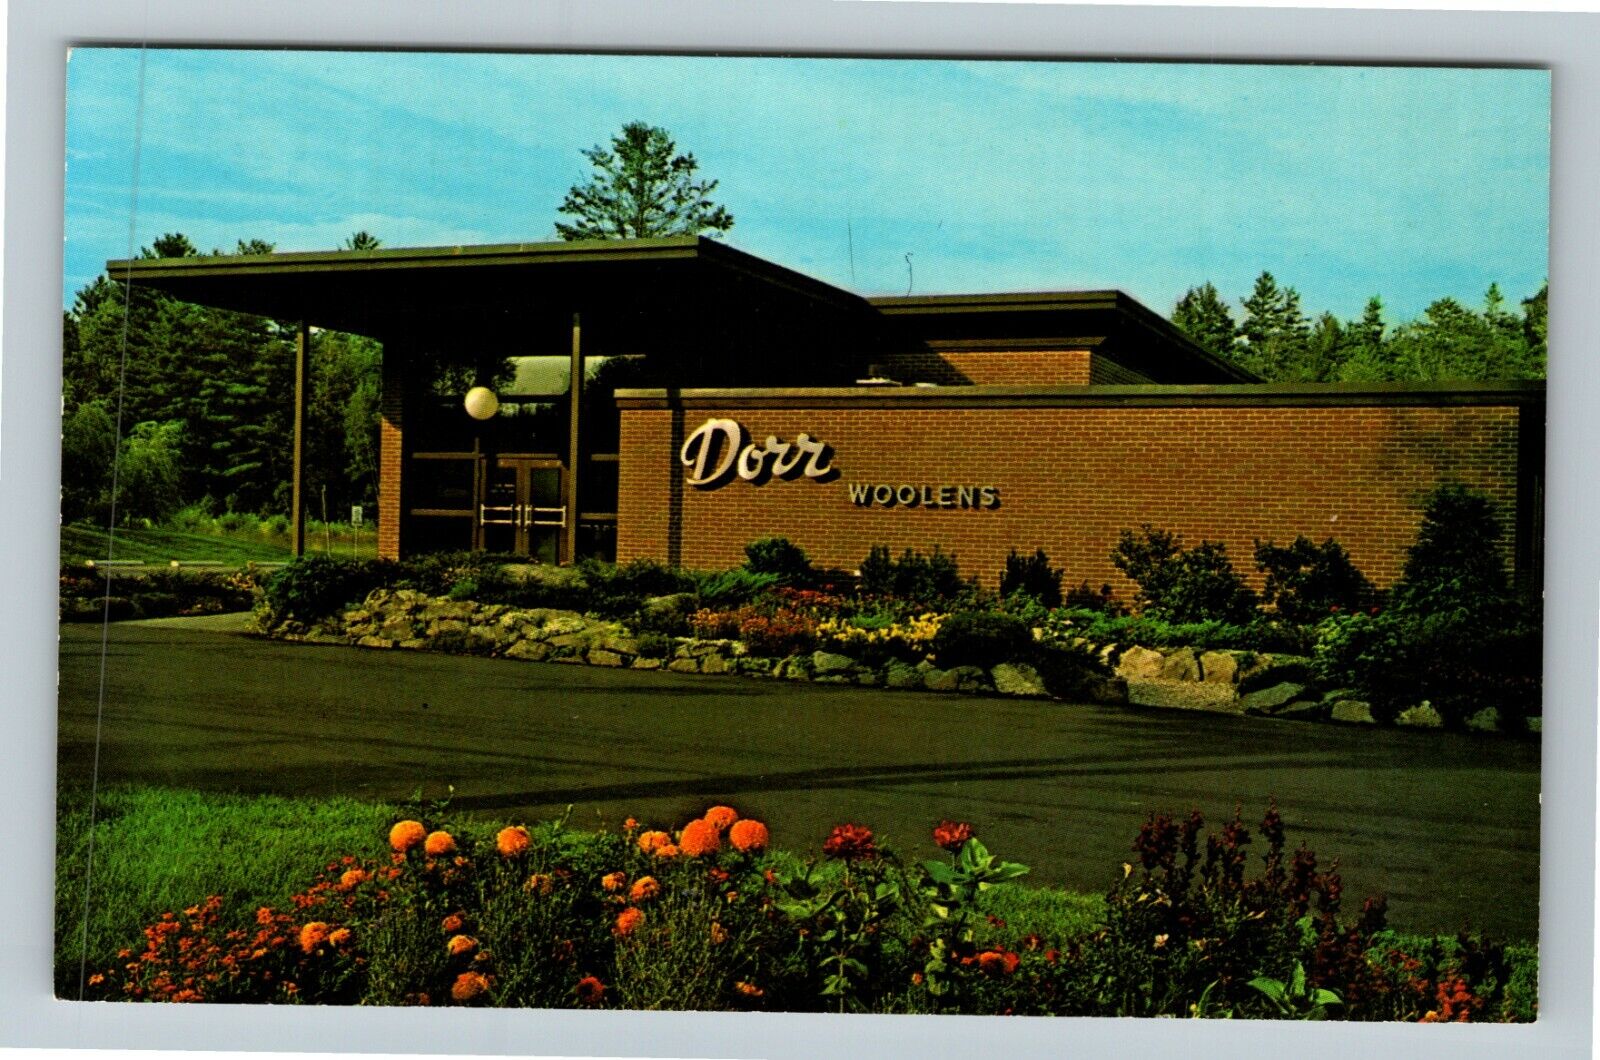 Guild NH-New Hampshire, The Dorr Mill Store, Vintage Postcard